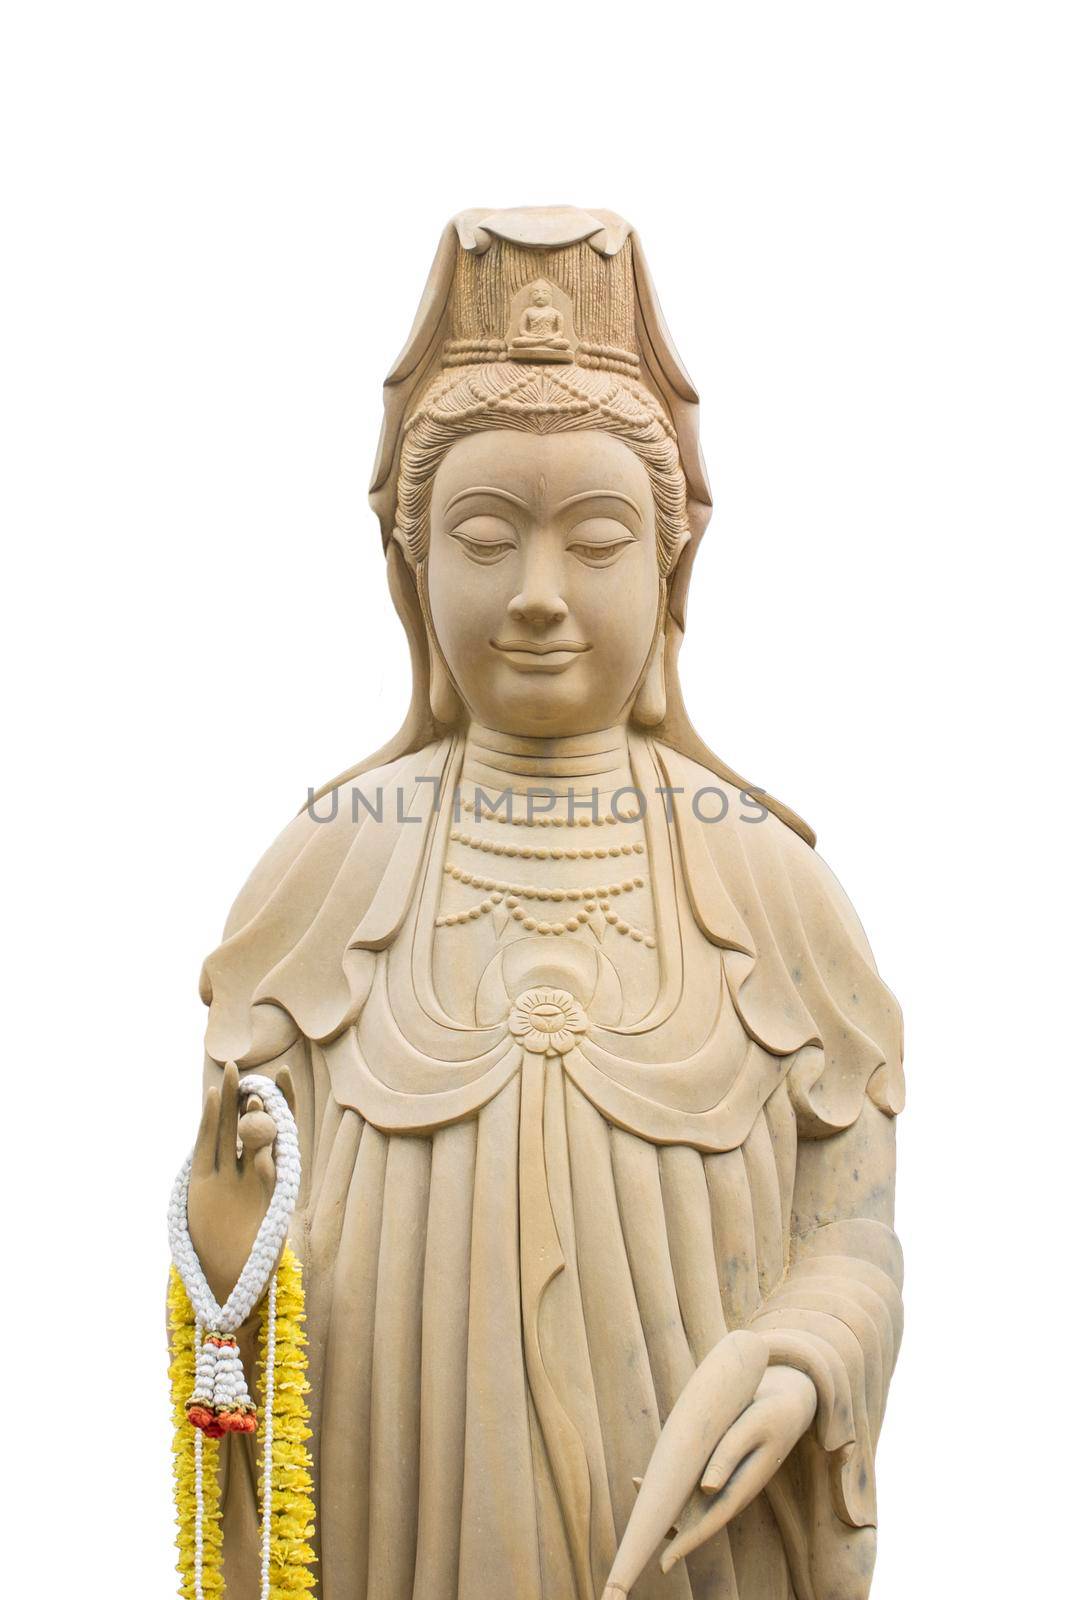 The statue of the Guanyin Boddhisatva on white background. Religion